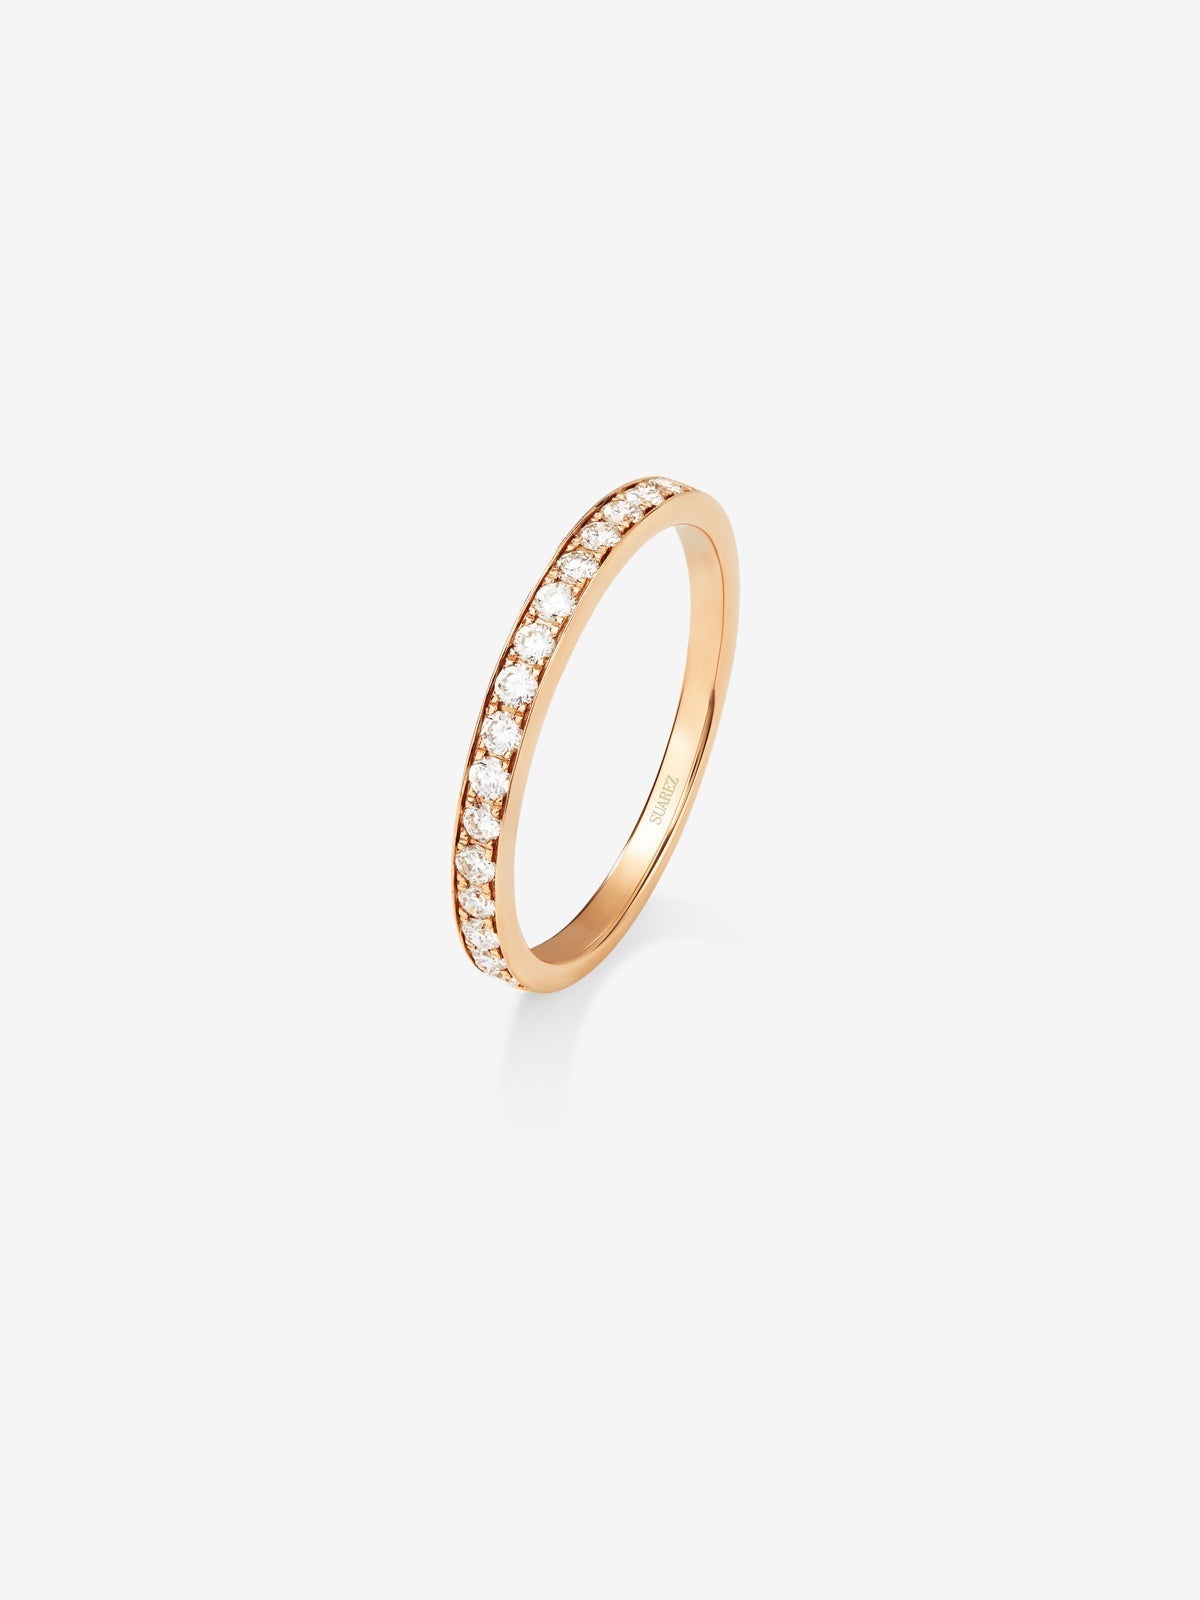 Half ring in 18K rose gold with 16 brilliant-cut diamonds with a total of 0.23 cts